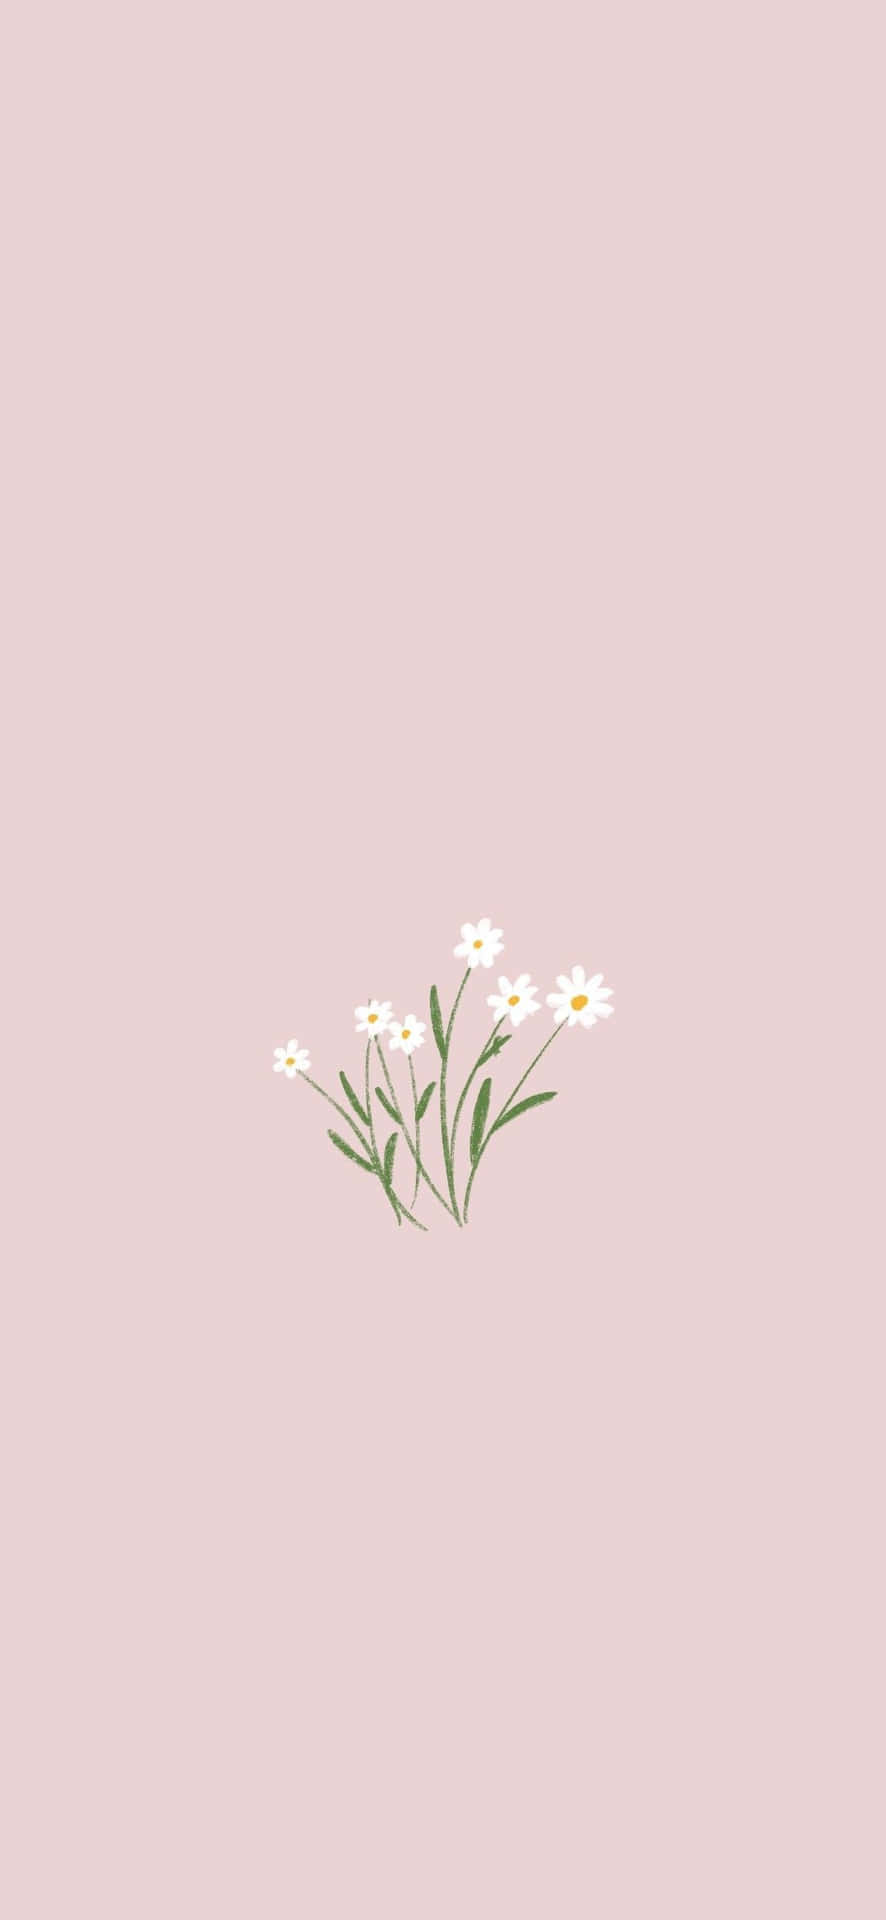 Download Flower Phone 1080 X 2340 Background | Wallpapers.com